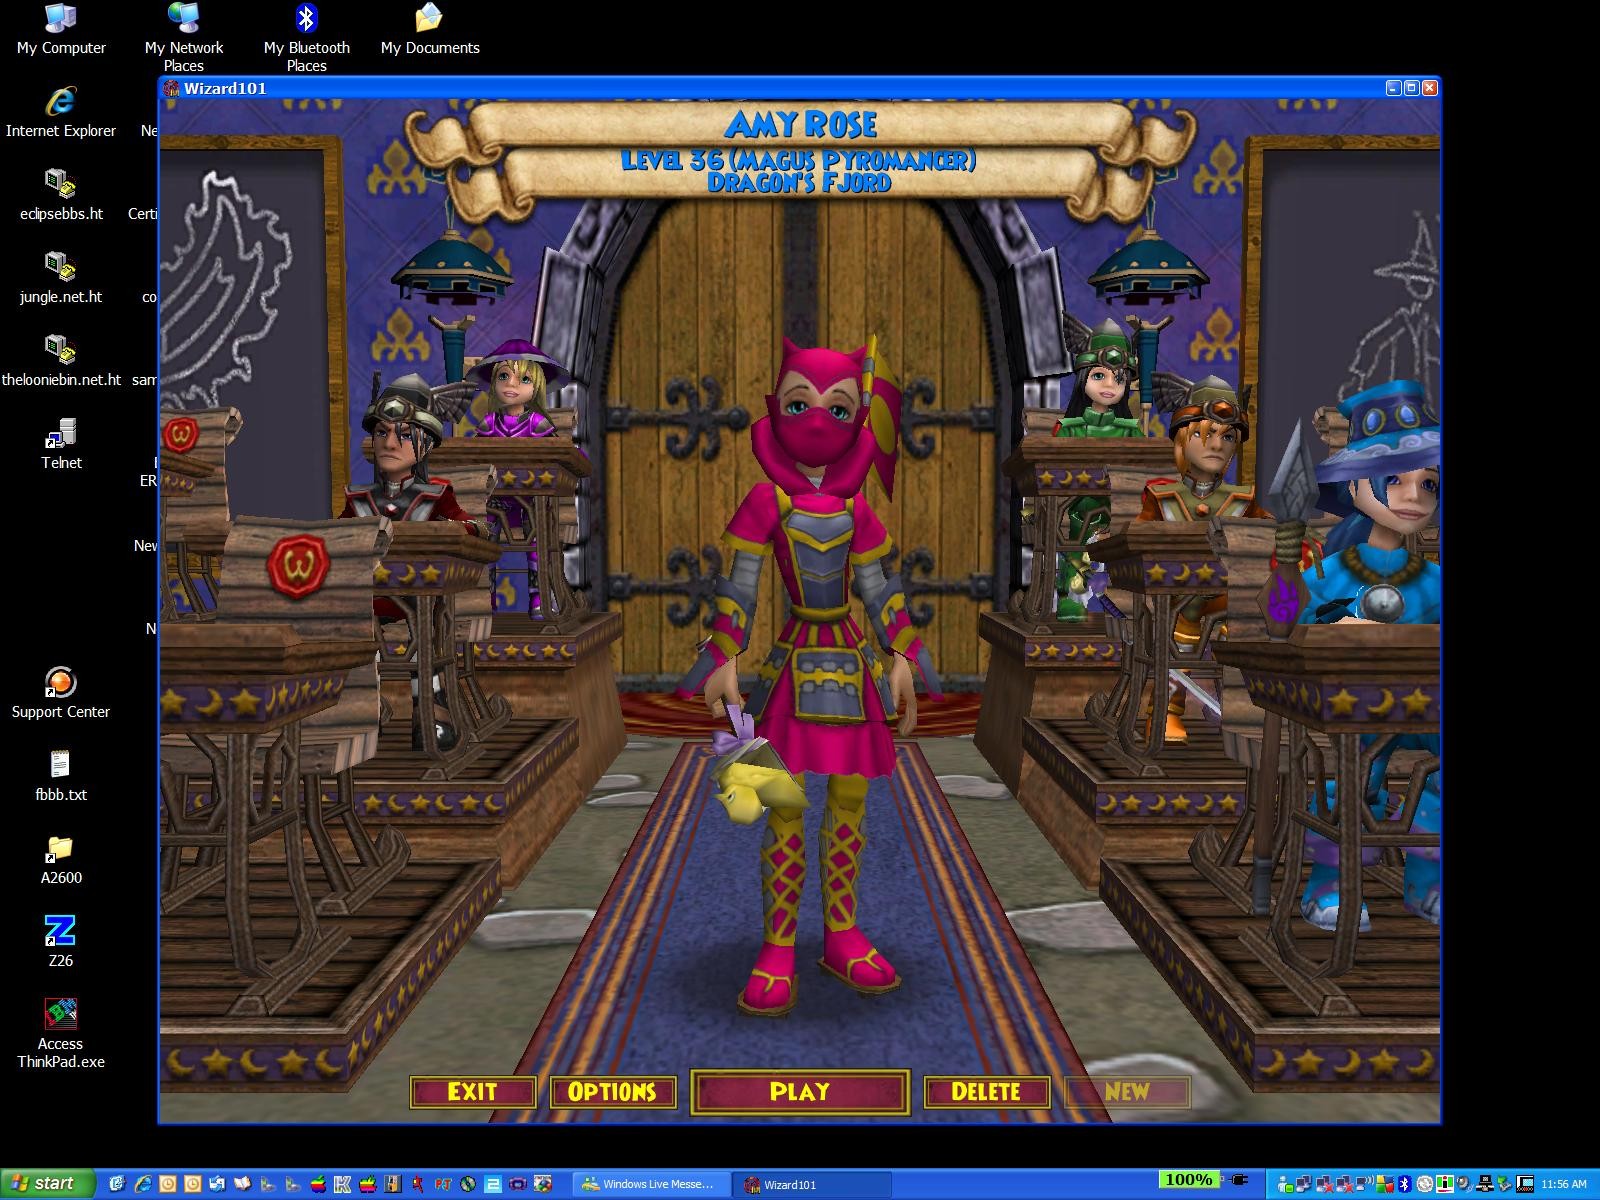 Amy Rose Fire Wizard Mmorpg Wizard101 Galleries